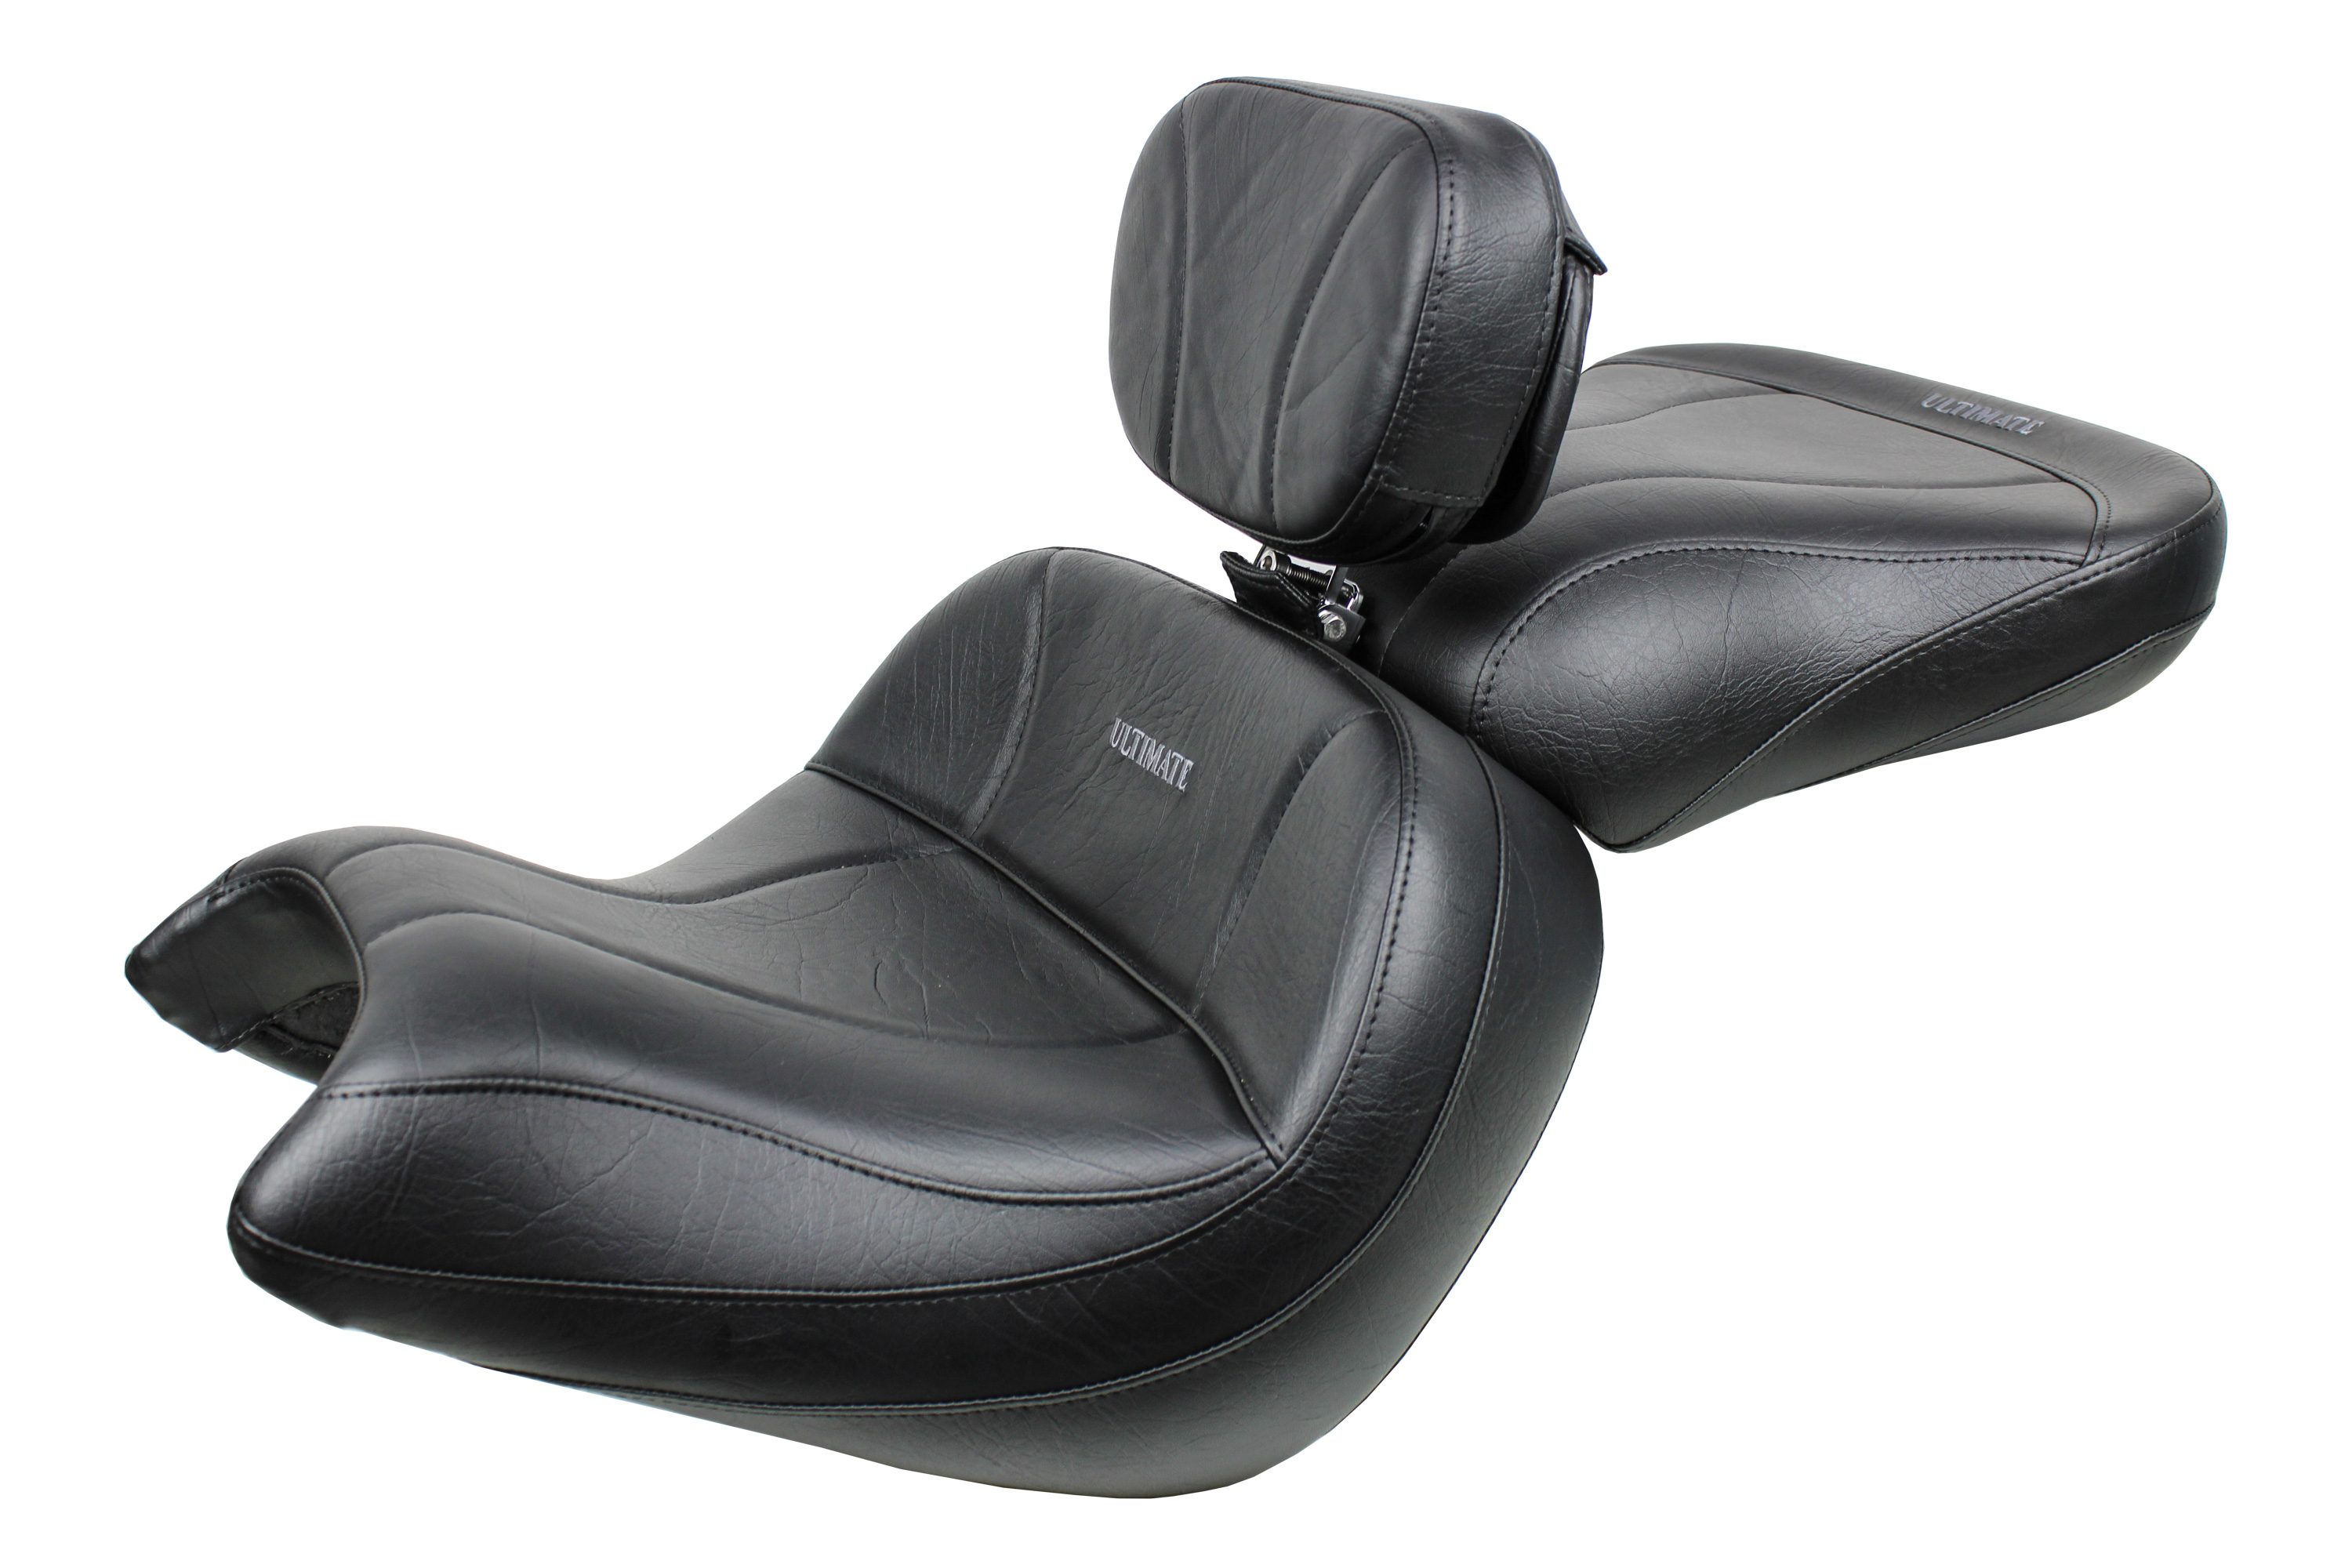 VTX 1800 C Lowrider Seat, Passenger Seat and Driver Backrest - Plain or Studded